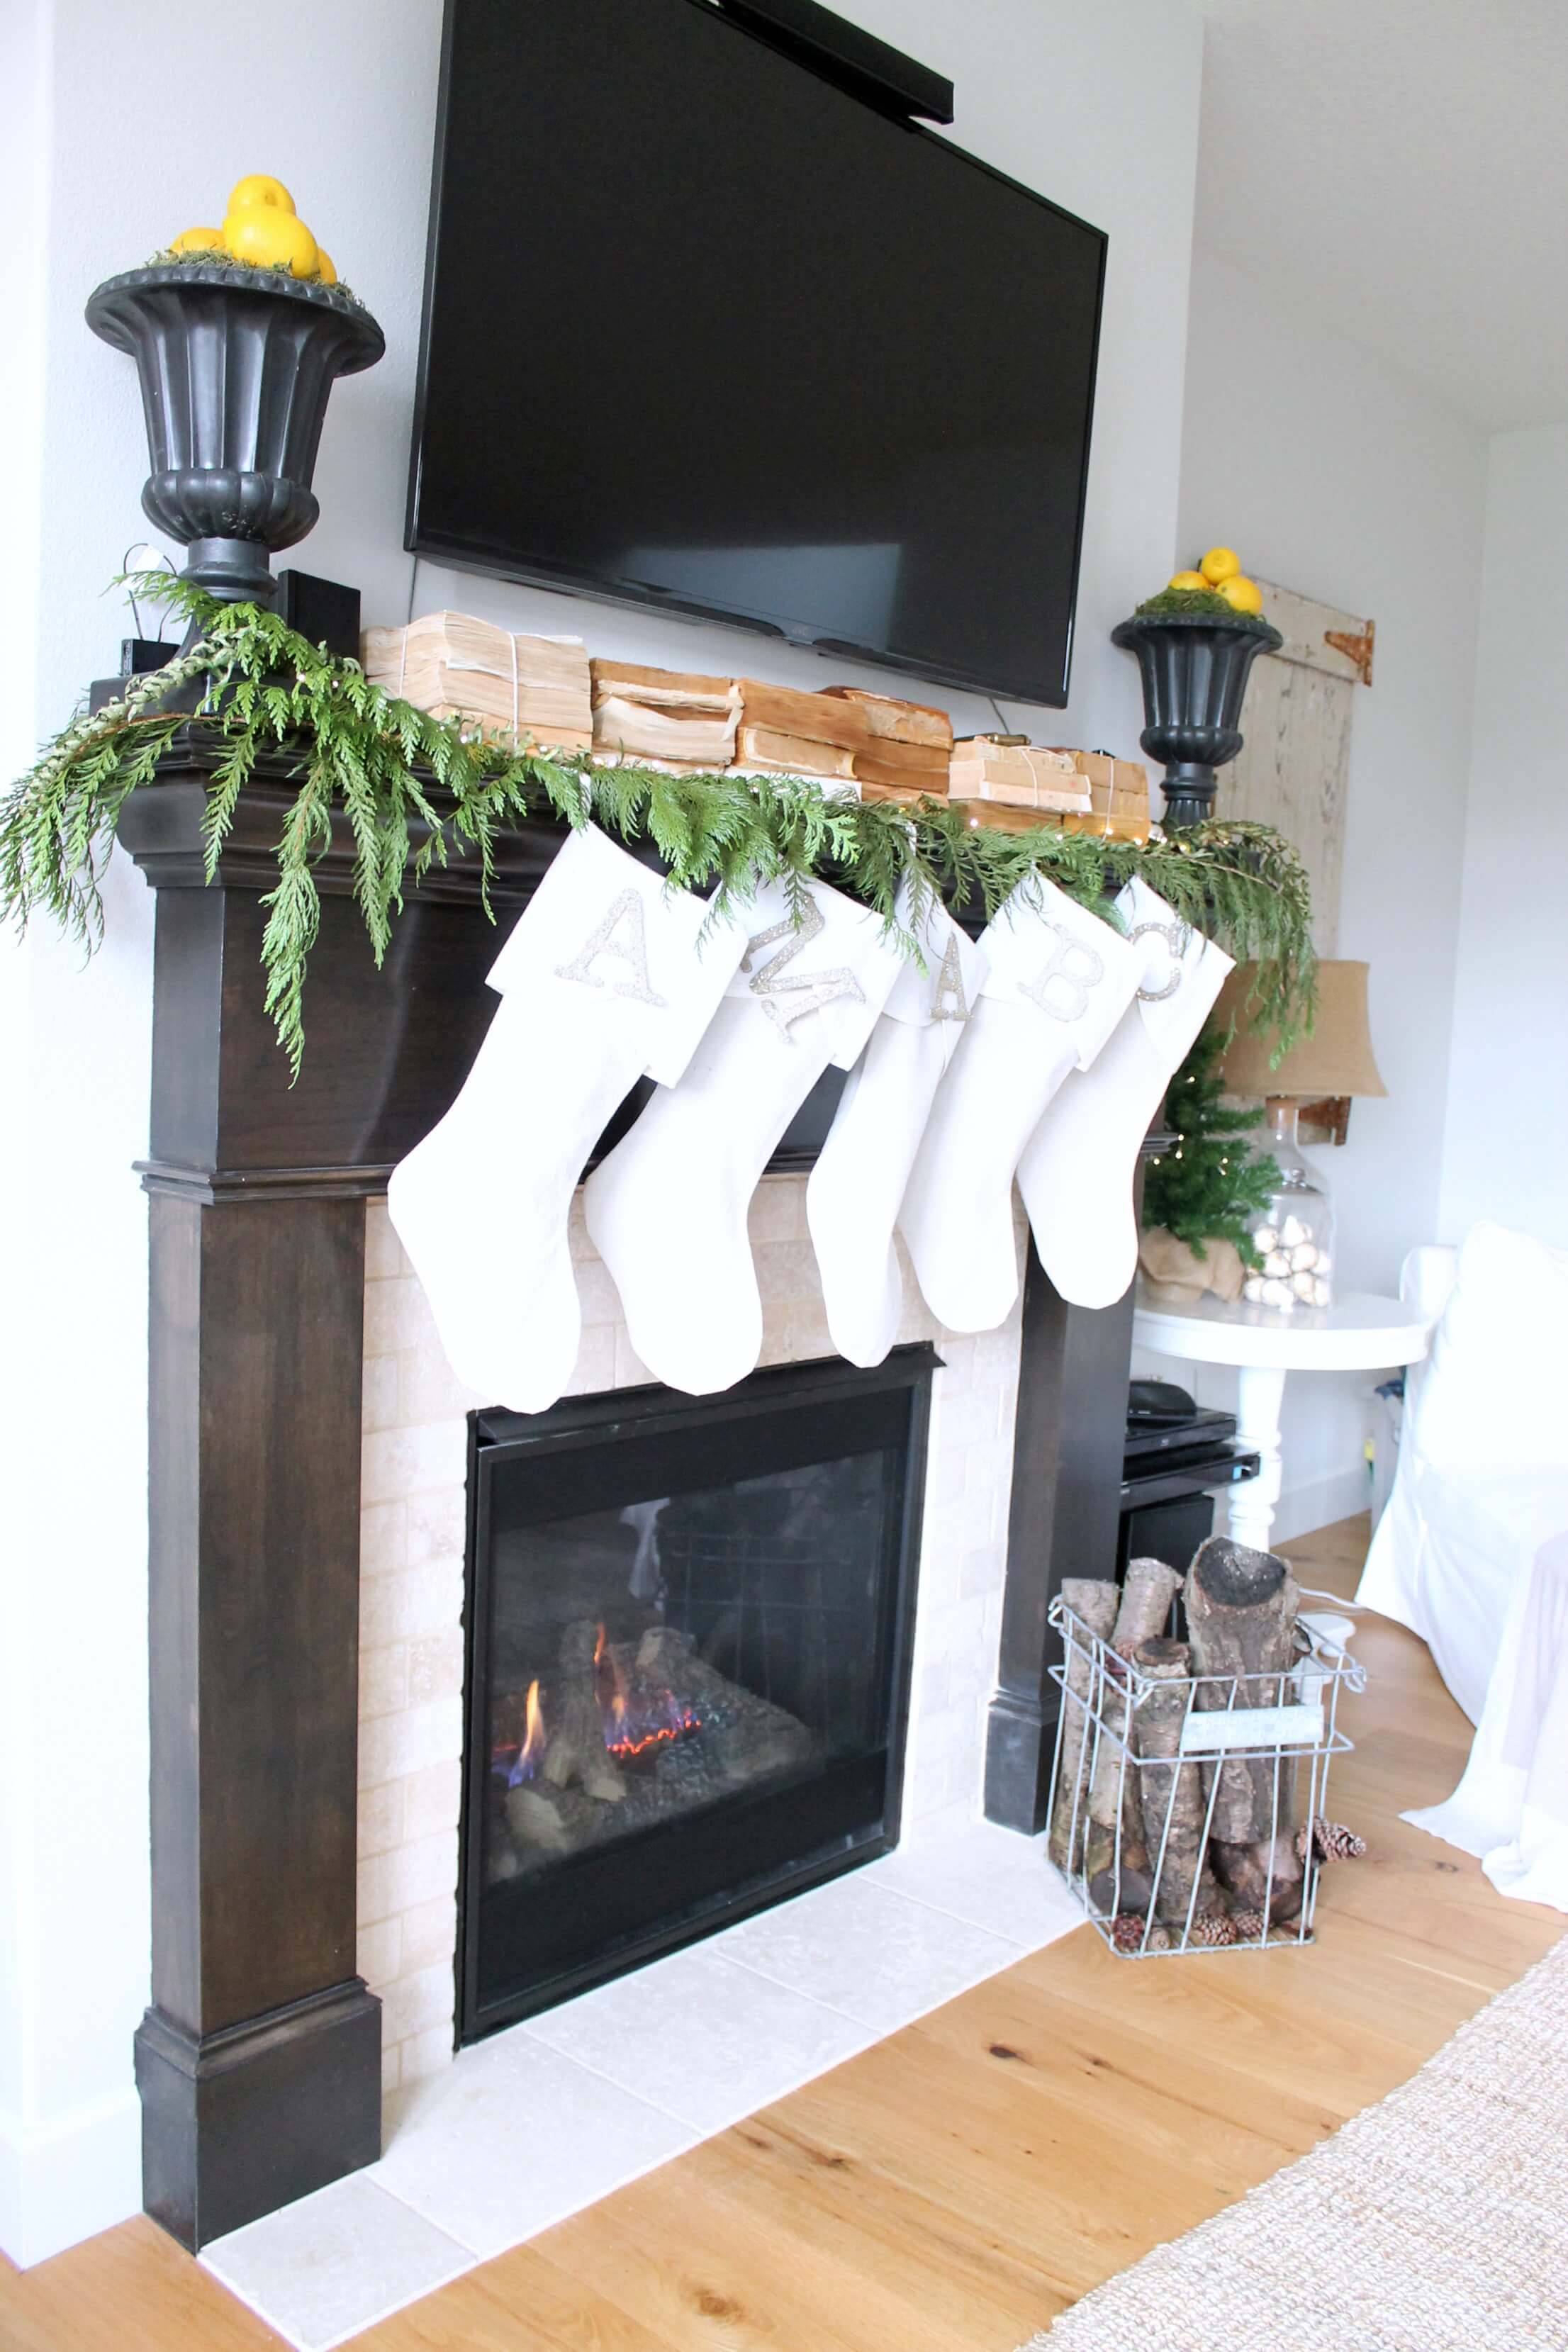 How To Decorate A Mantel When You Have A TV Above It! — DESIGNED